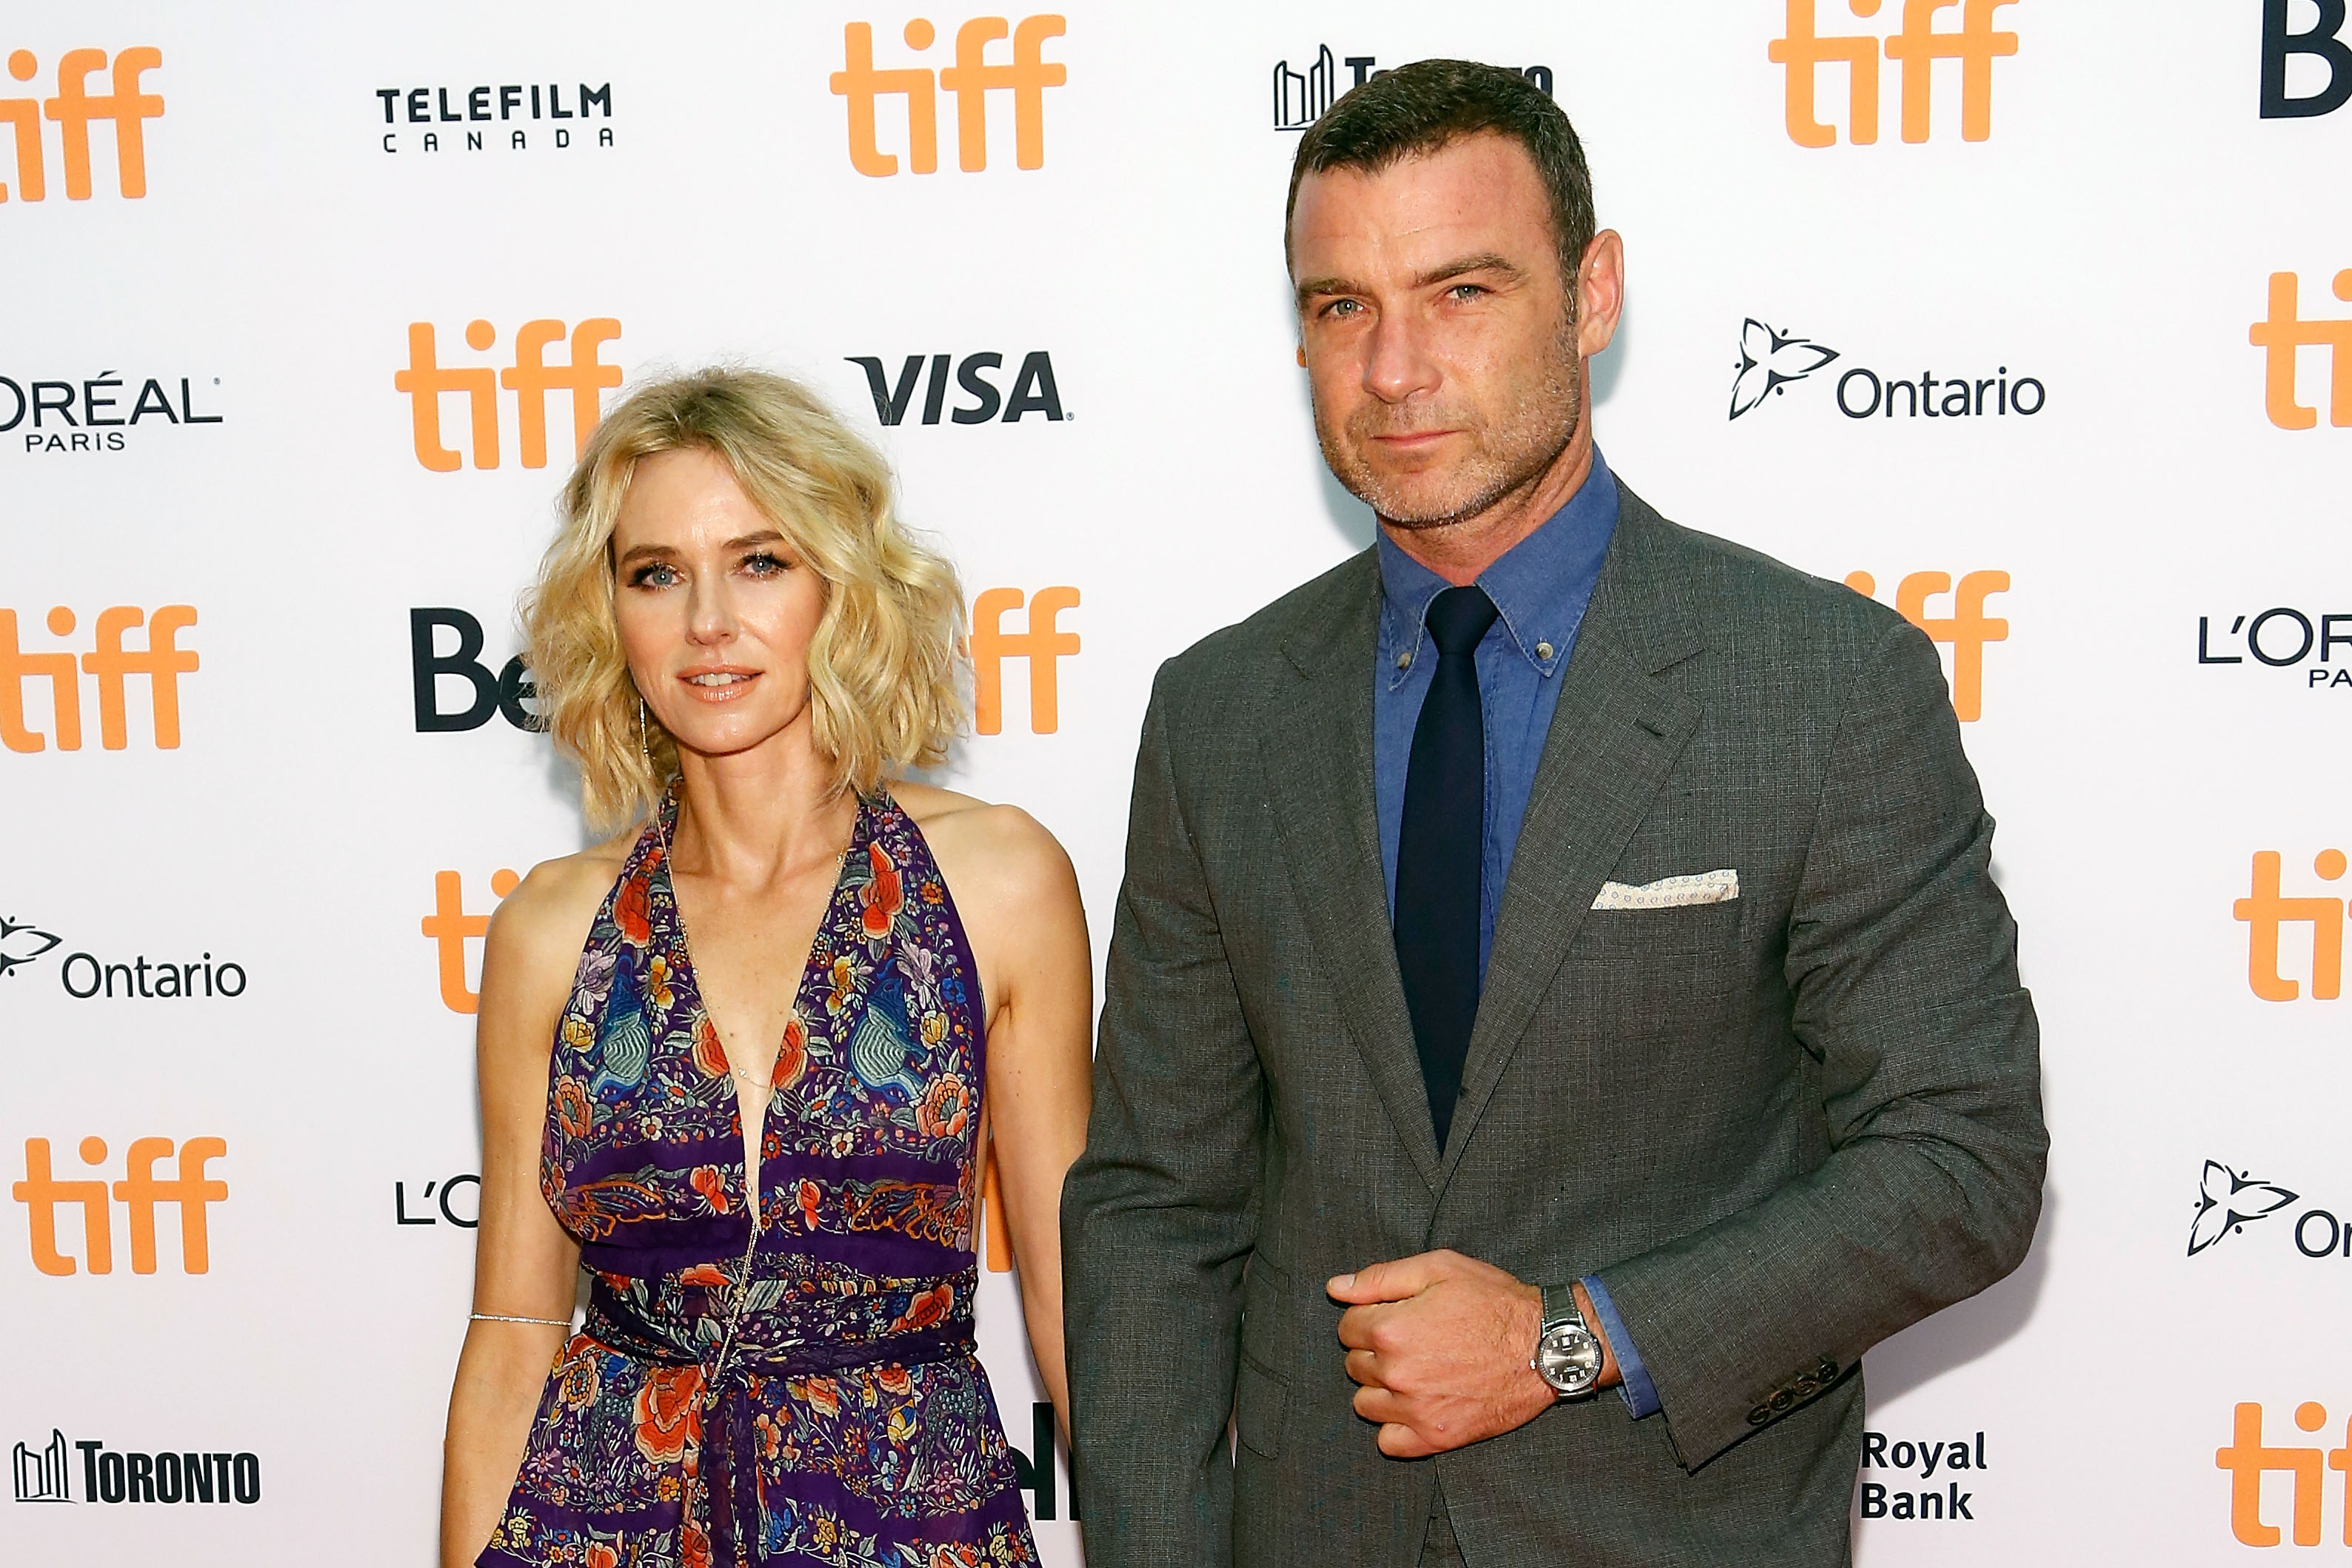 Naomi Watts and Liev Schreiber on September 10, 2016 in Toronto, Canada. | Source: Getty Images